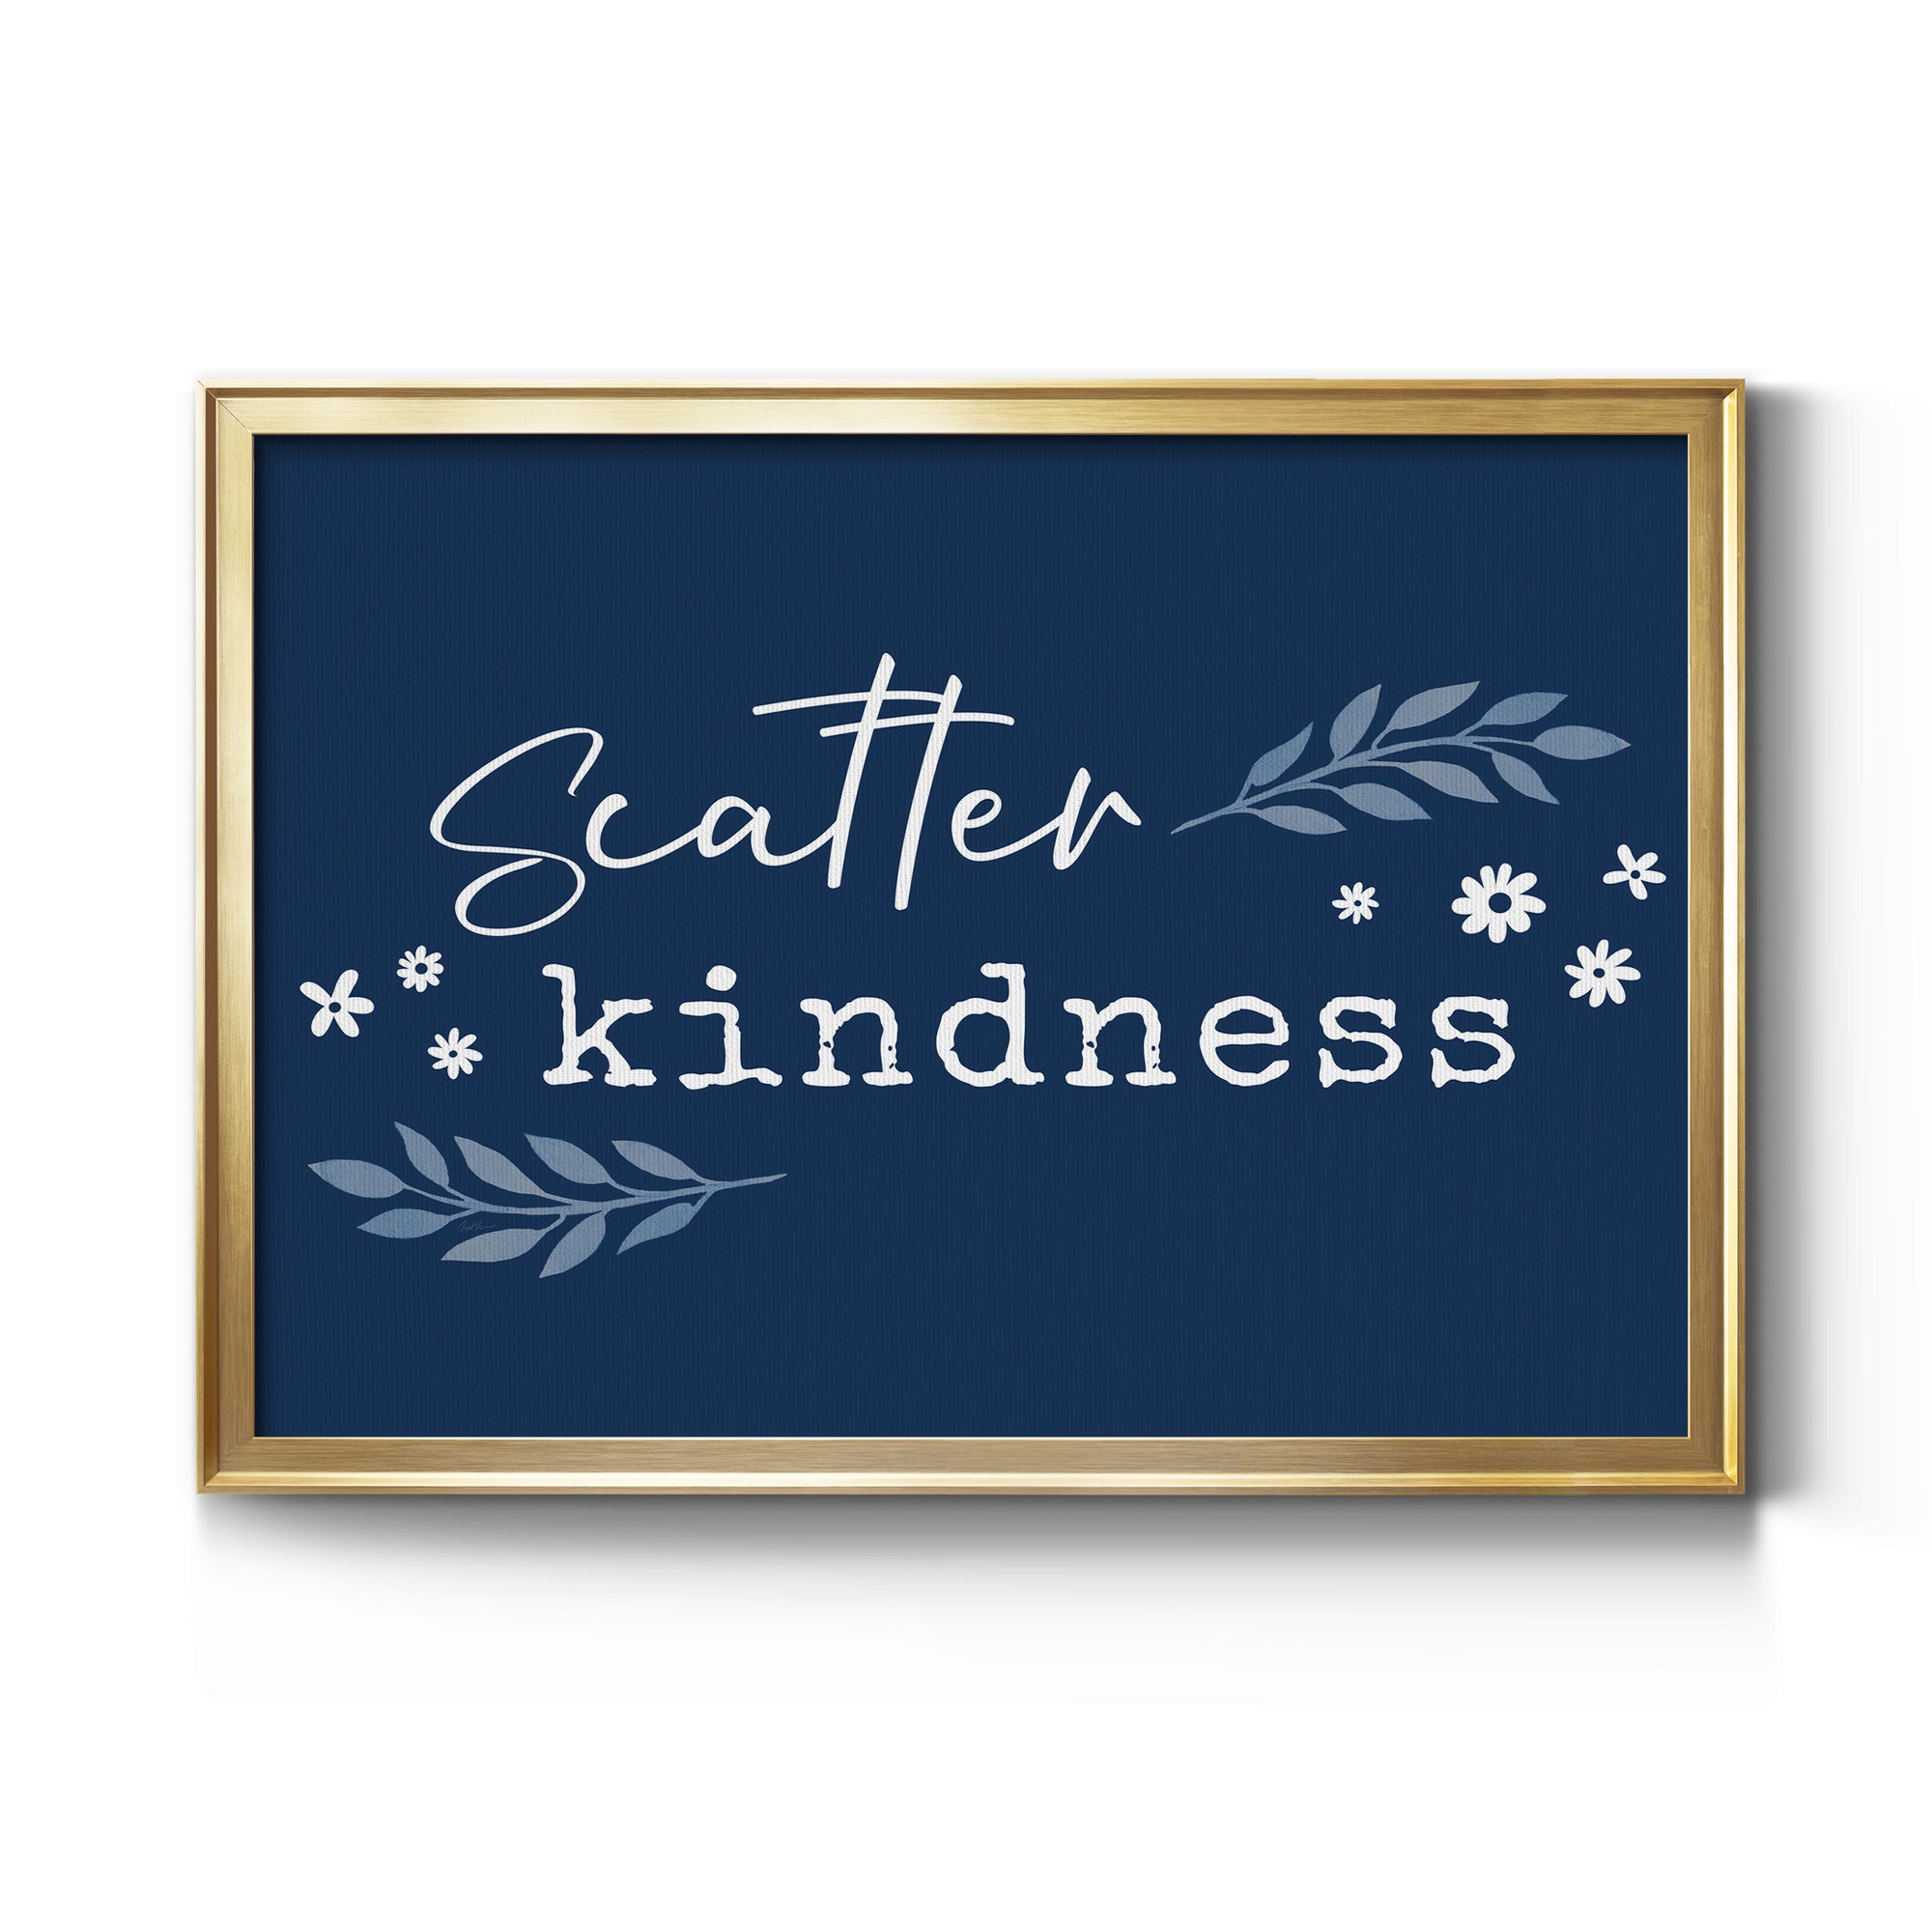 Kindness Premium Classic Framed Canvas - Ready to Hang